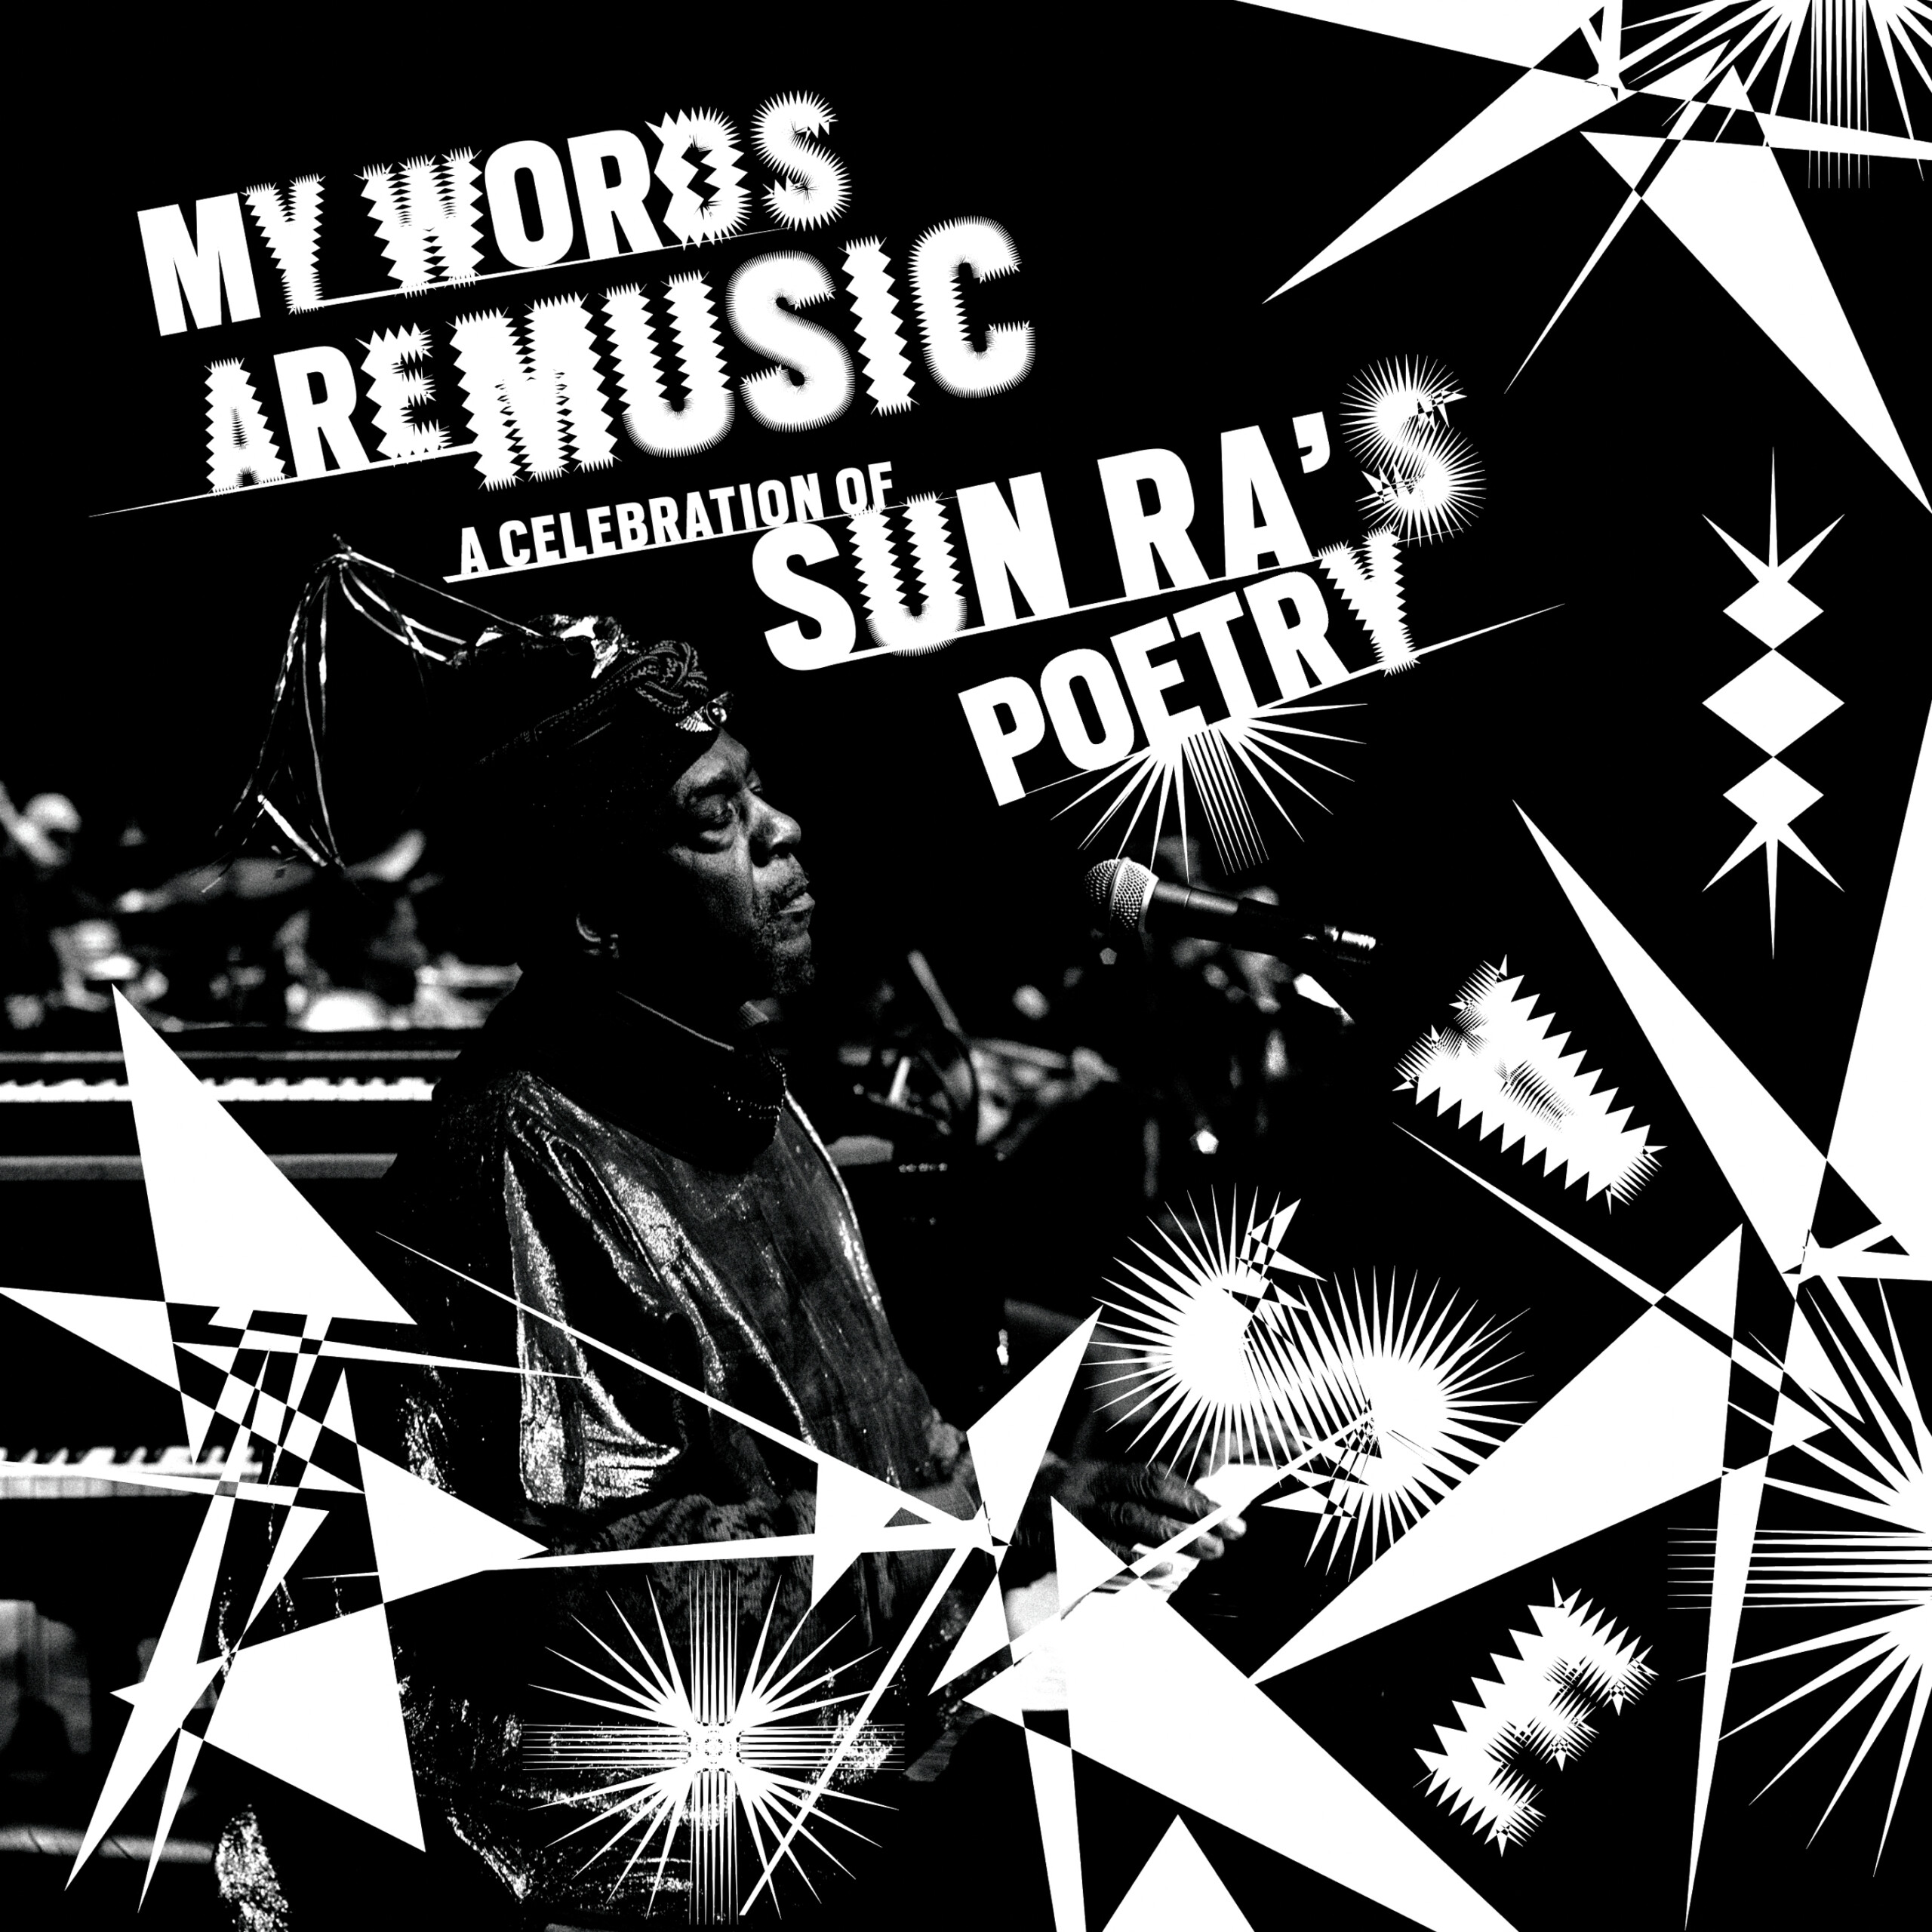 My Words are Music cover art 